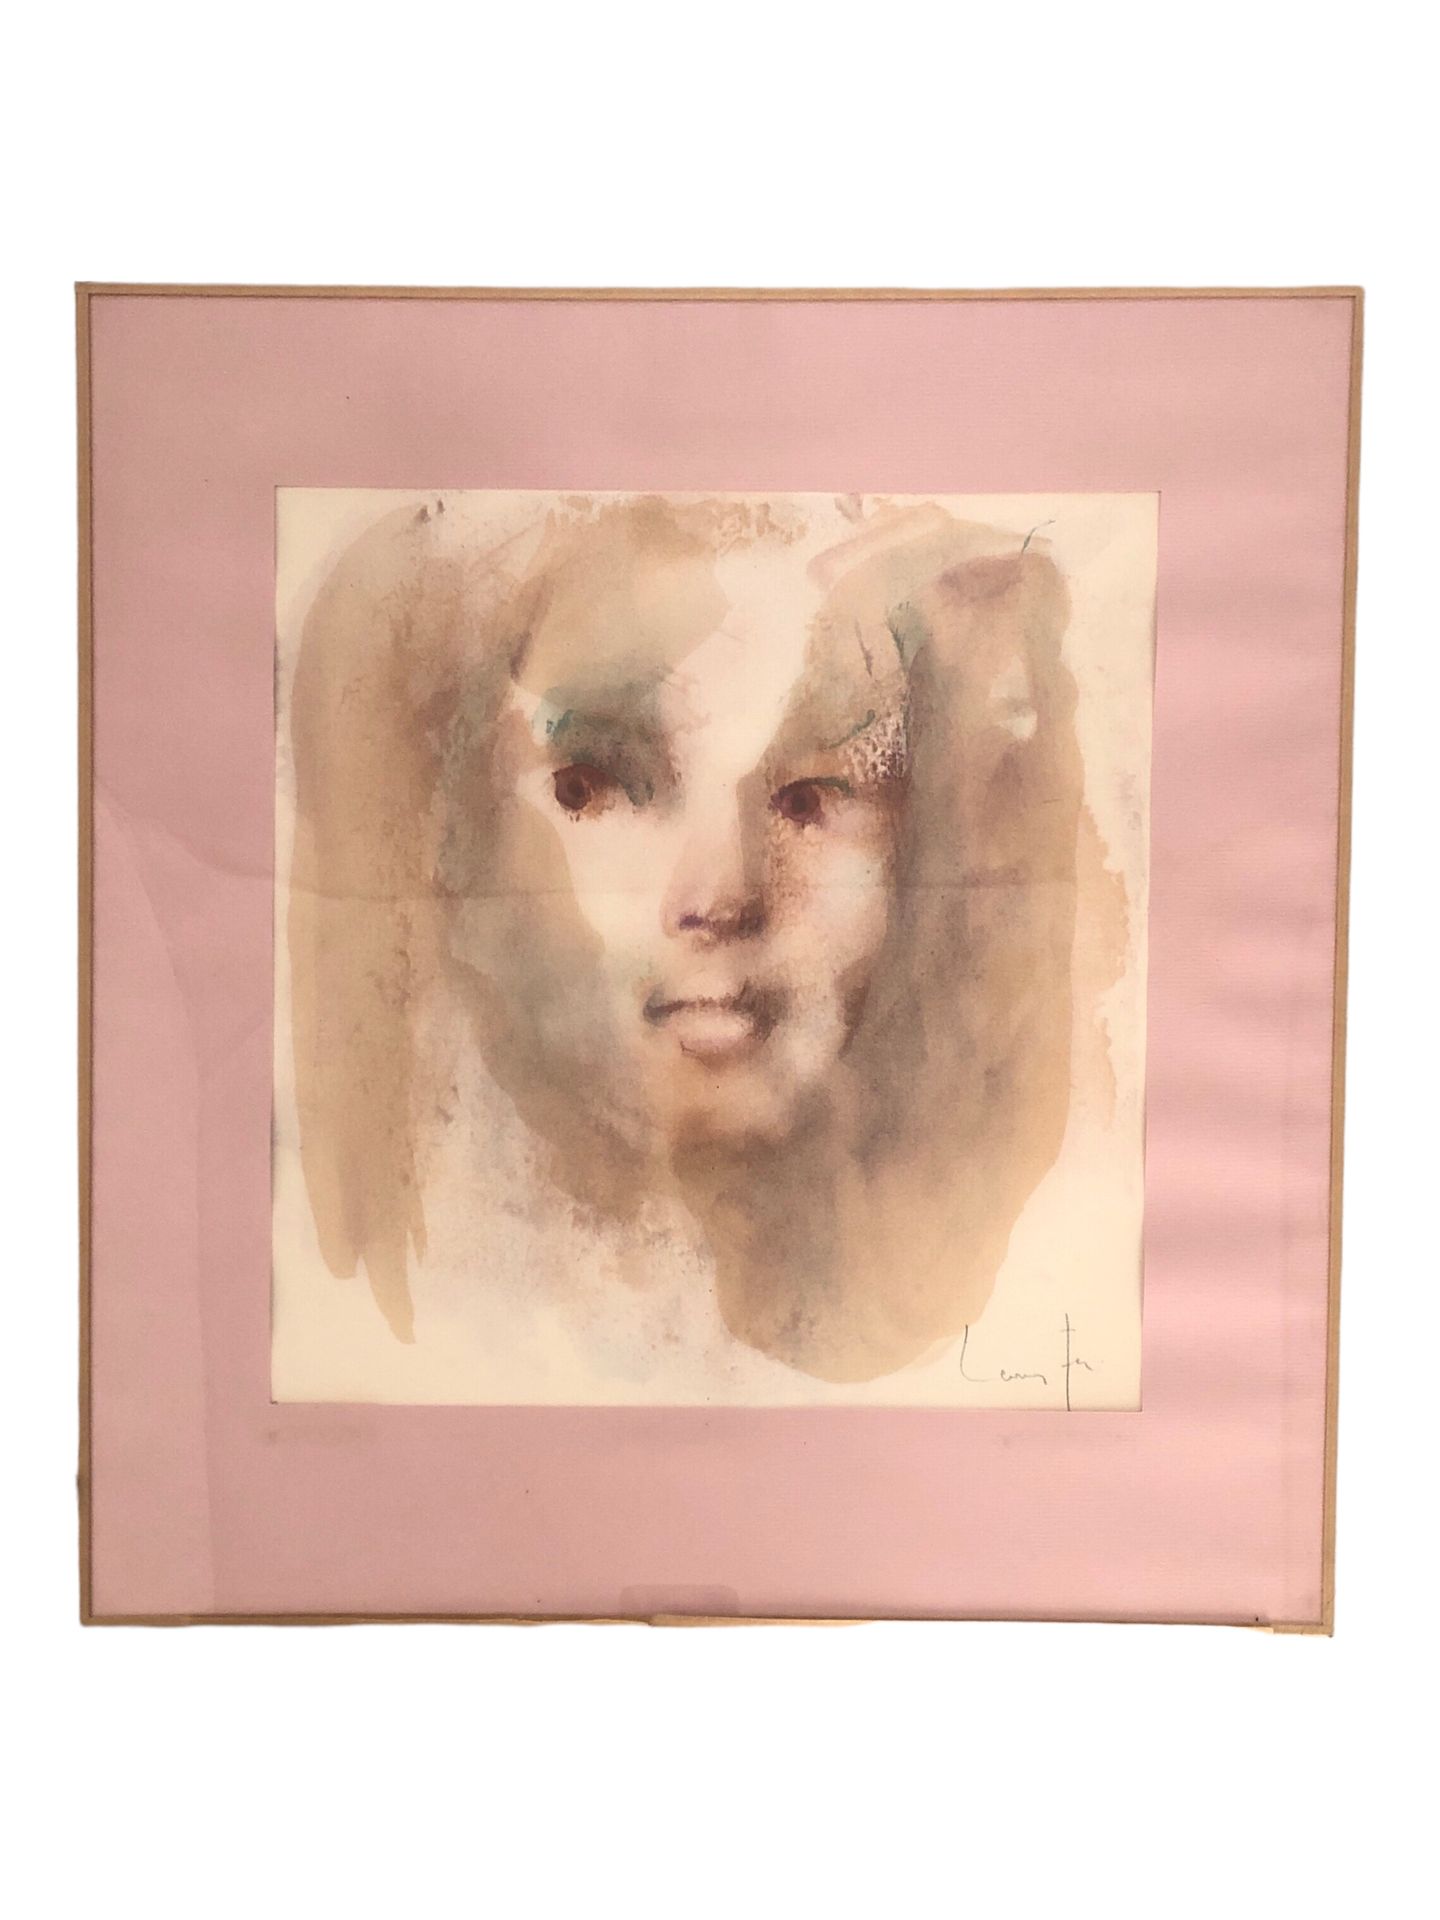 Null Leonor FINI 1907-1996

Face

Lithograph, signed lower right, justified lowe&hellip;